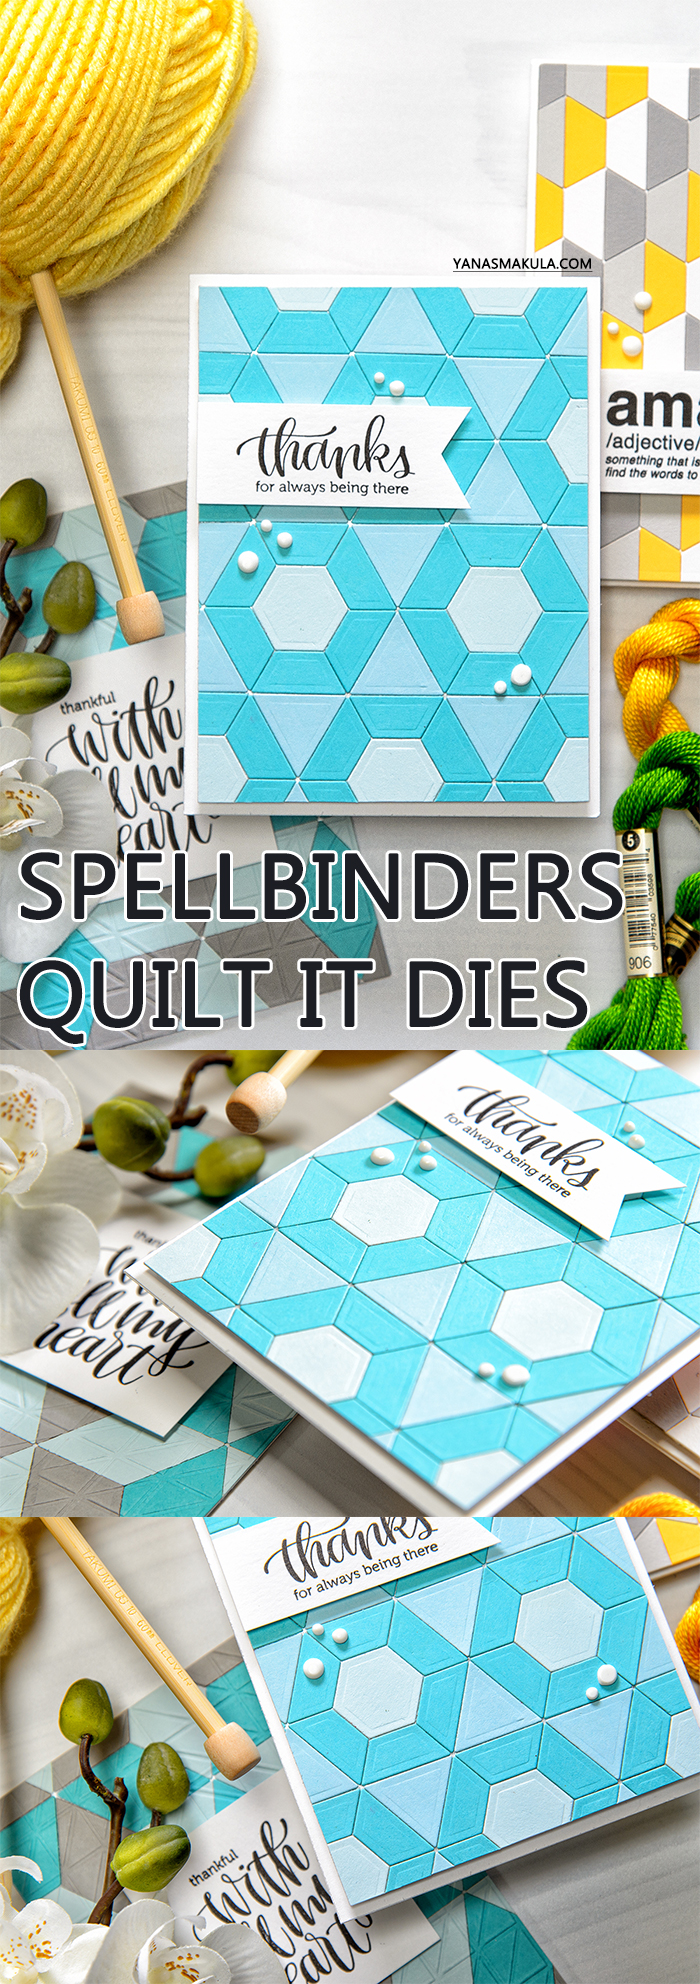 Spellbinders | Quilt It Collection - Thanks for Always Being There. Using ems Quilt Dies S3-285. Project by Yana Smakula